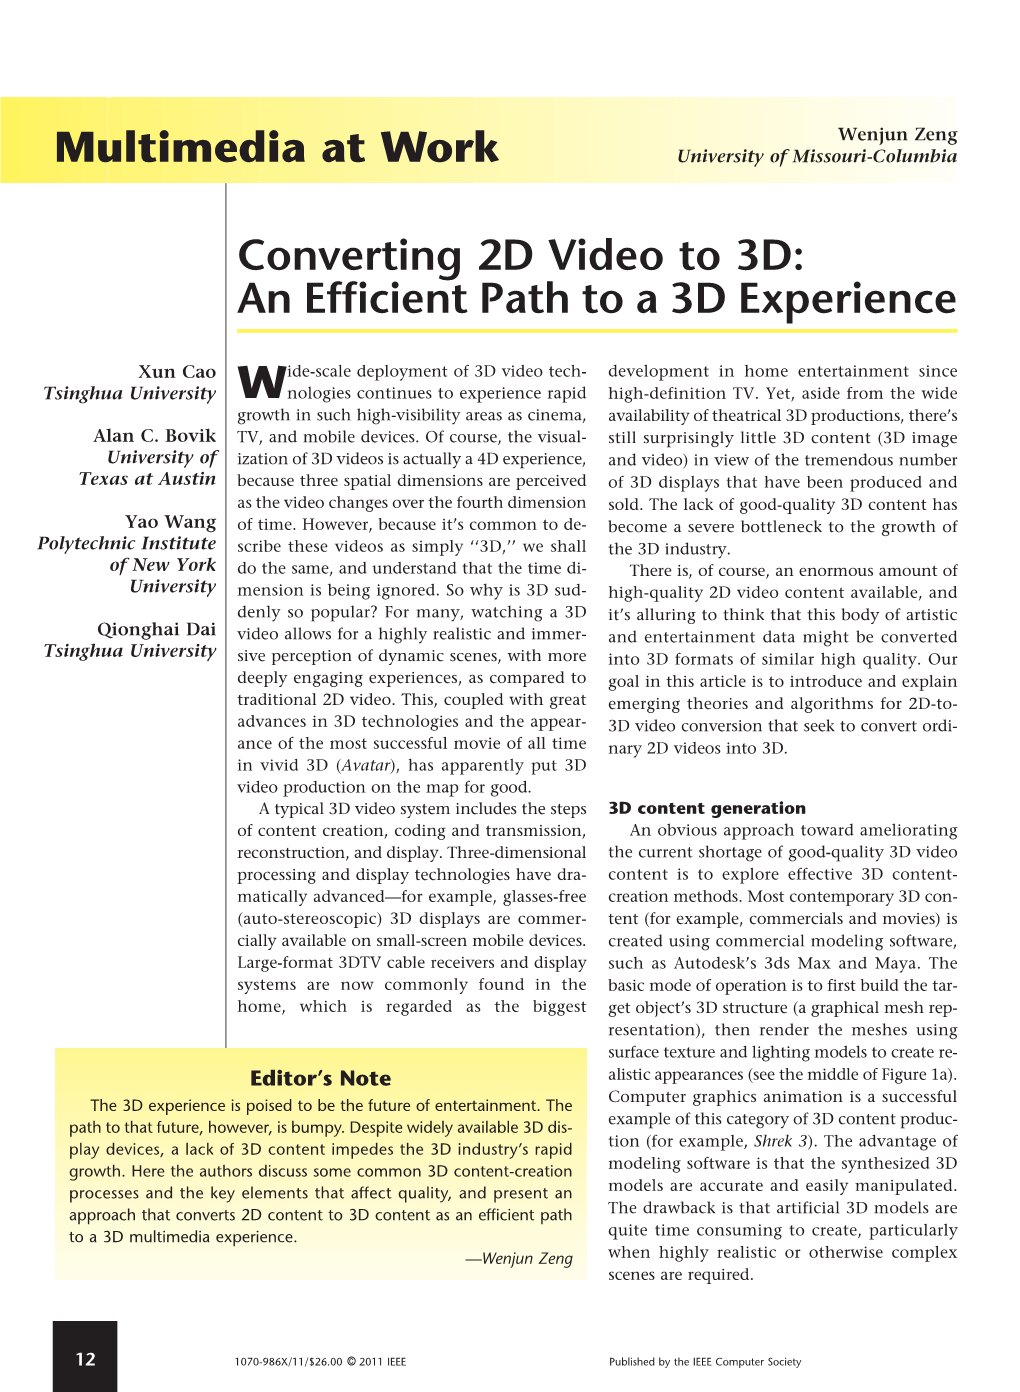 Converting 2D Video to 3D: an Efficient Path to a 3D Experience Multimedia at Work